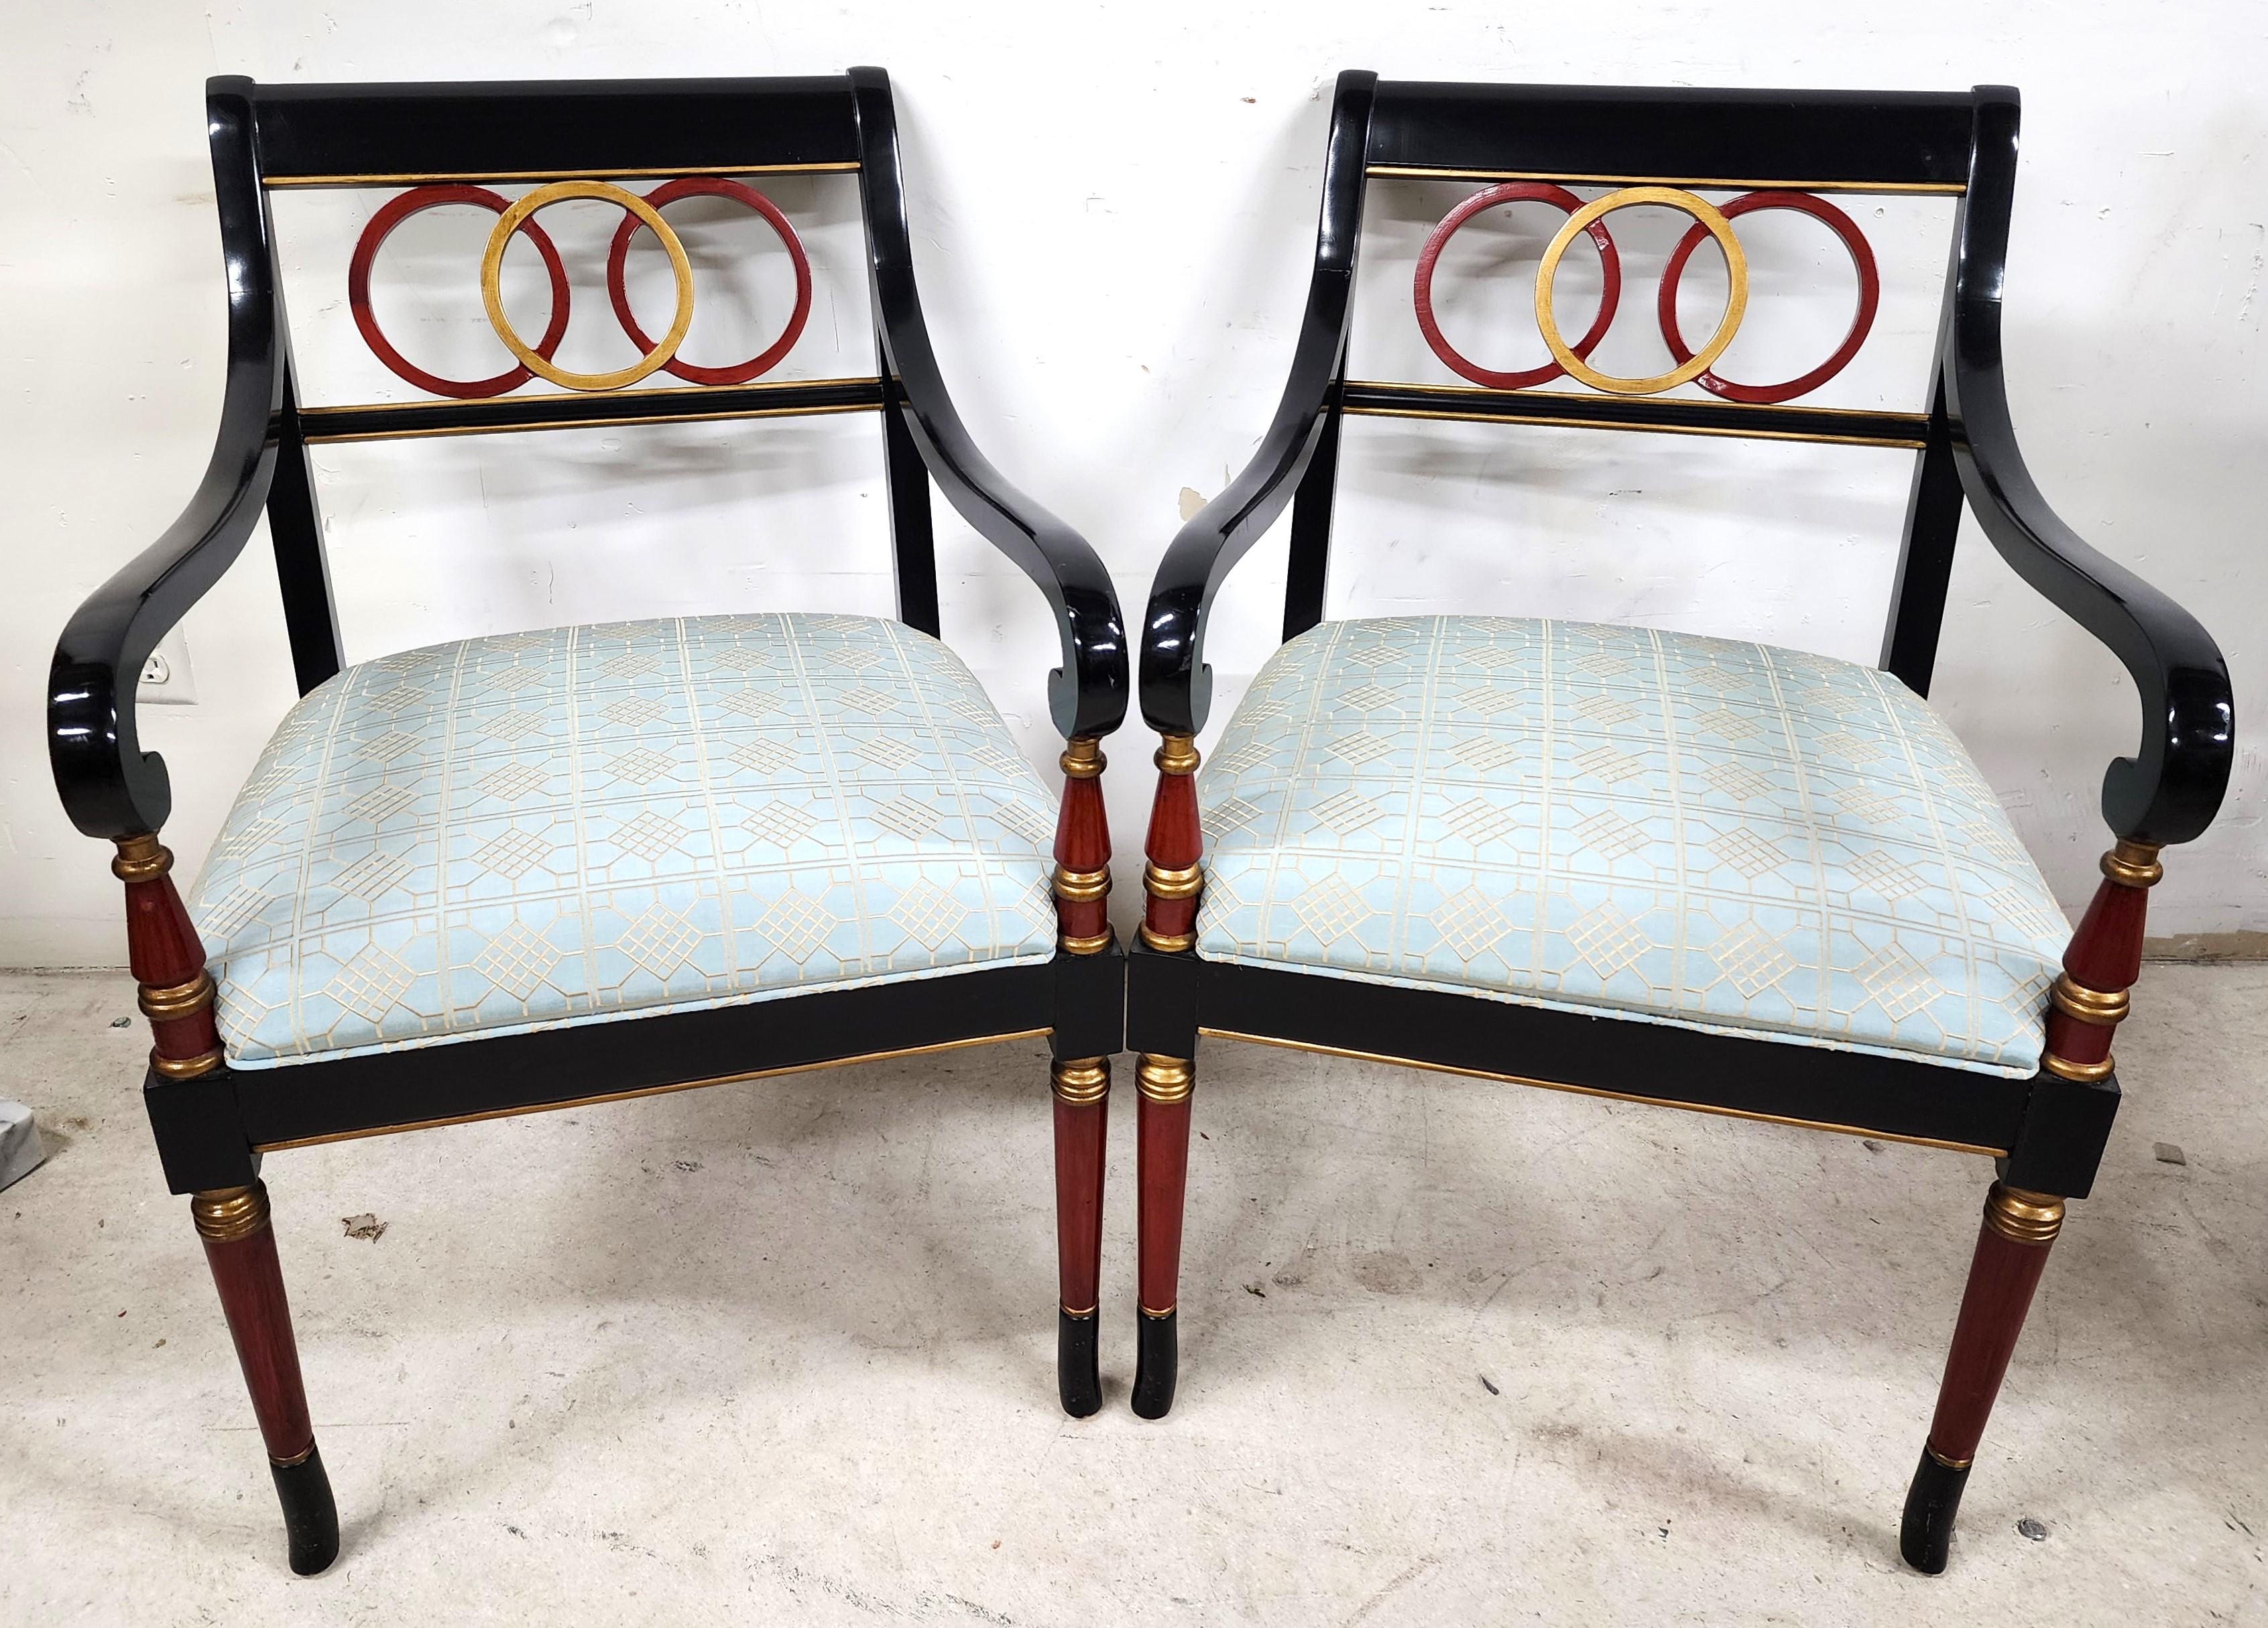 For FULL item description click on CONTINUE READING at the bottom of this page.

Offering One Of Our Recent Palm Beach Estate Fine Furniture Acquisitions Of A
Pair of Maitland Smith Style Regency Ebonized Armchairs 

Coloration: Fabric is a powder